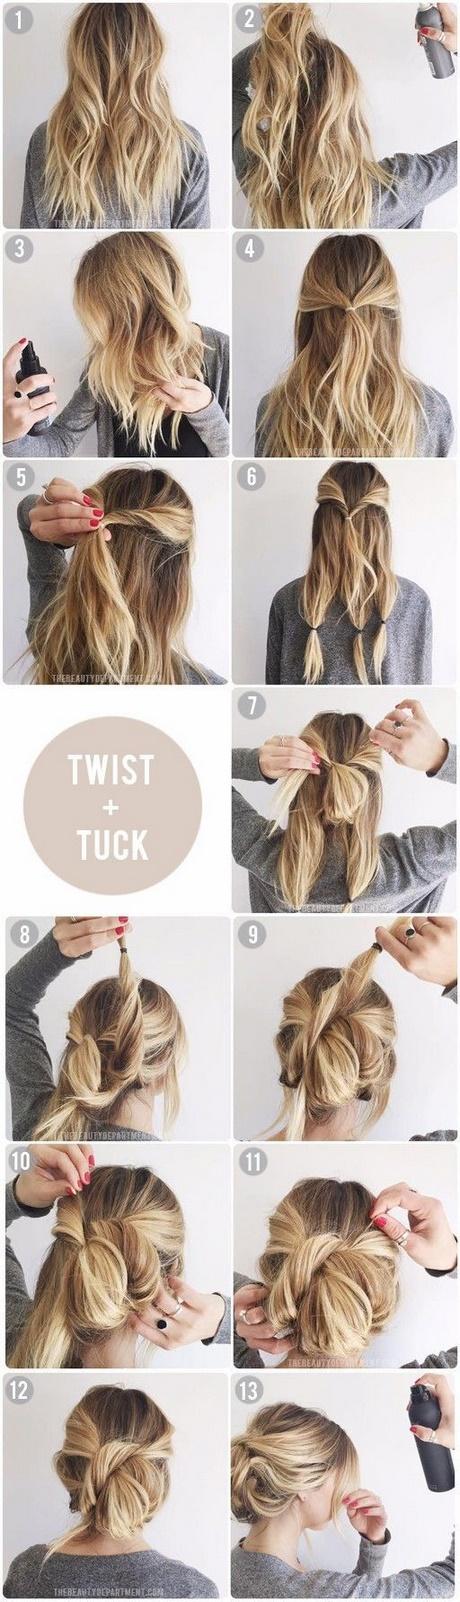 Easy updos for thick long hair easy-updos-for-thick-long-hair-11_10